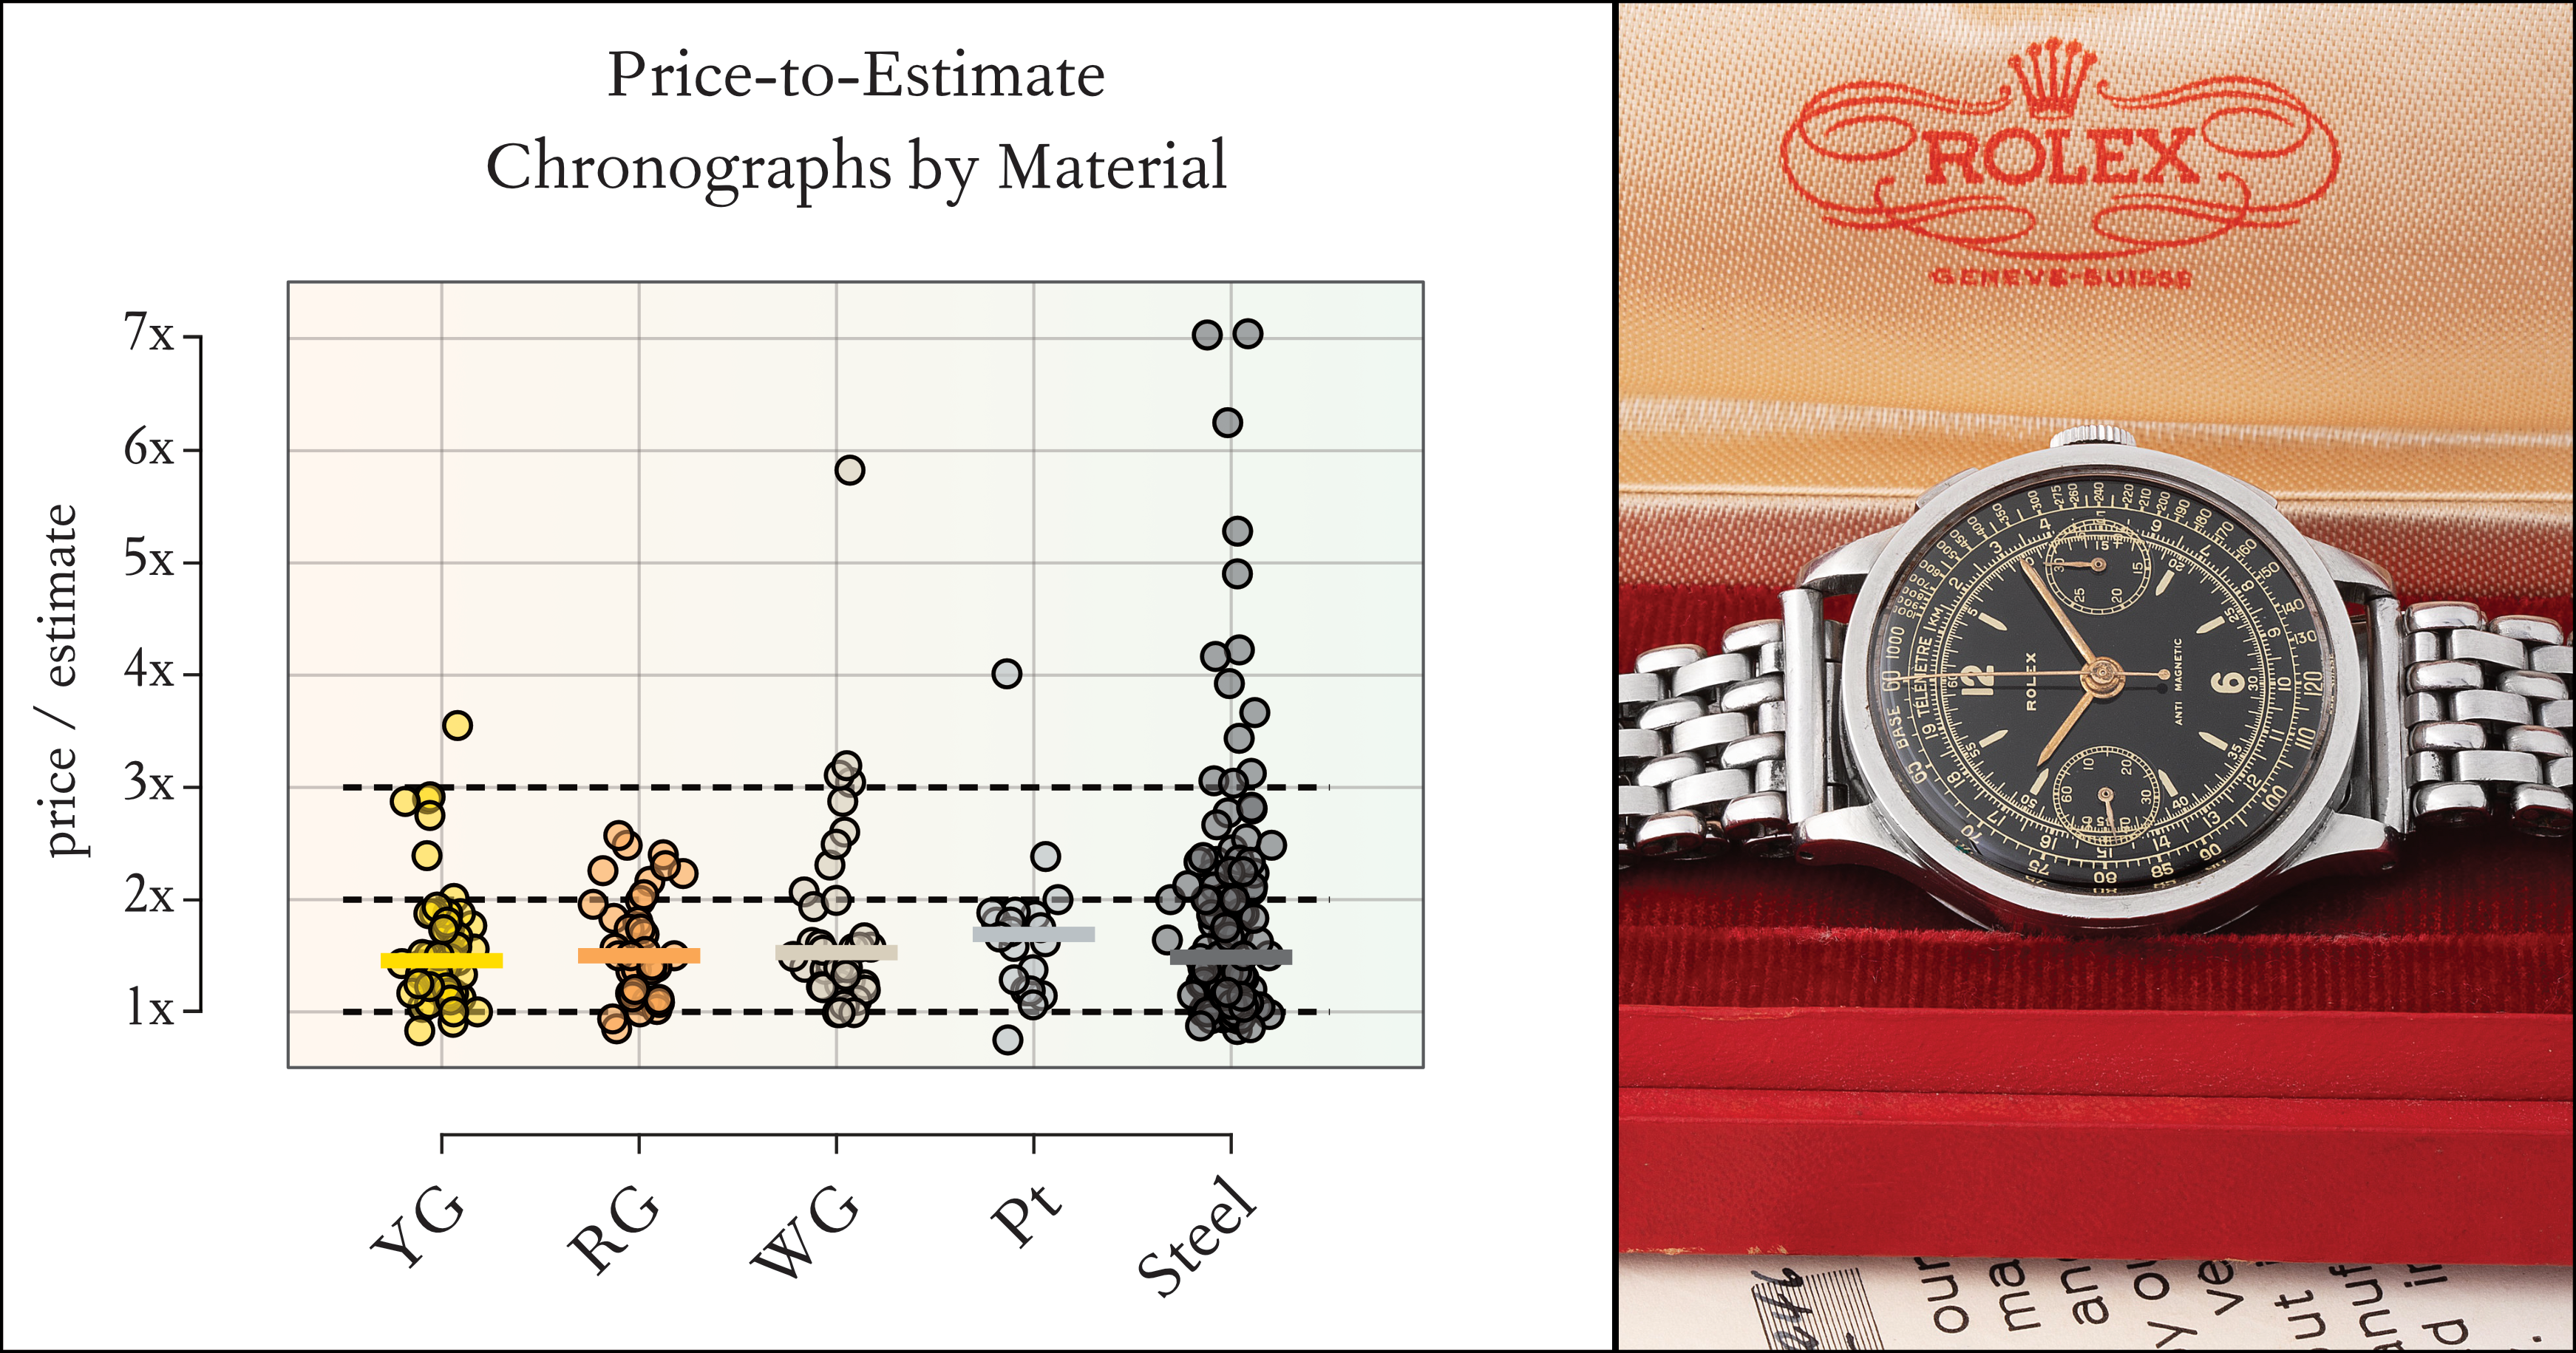 Prcie-to-Estimate ratio for Chronograph watches ordered by material - Spring 2022 Auction Cycle